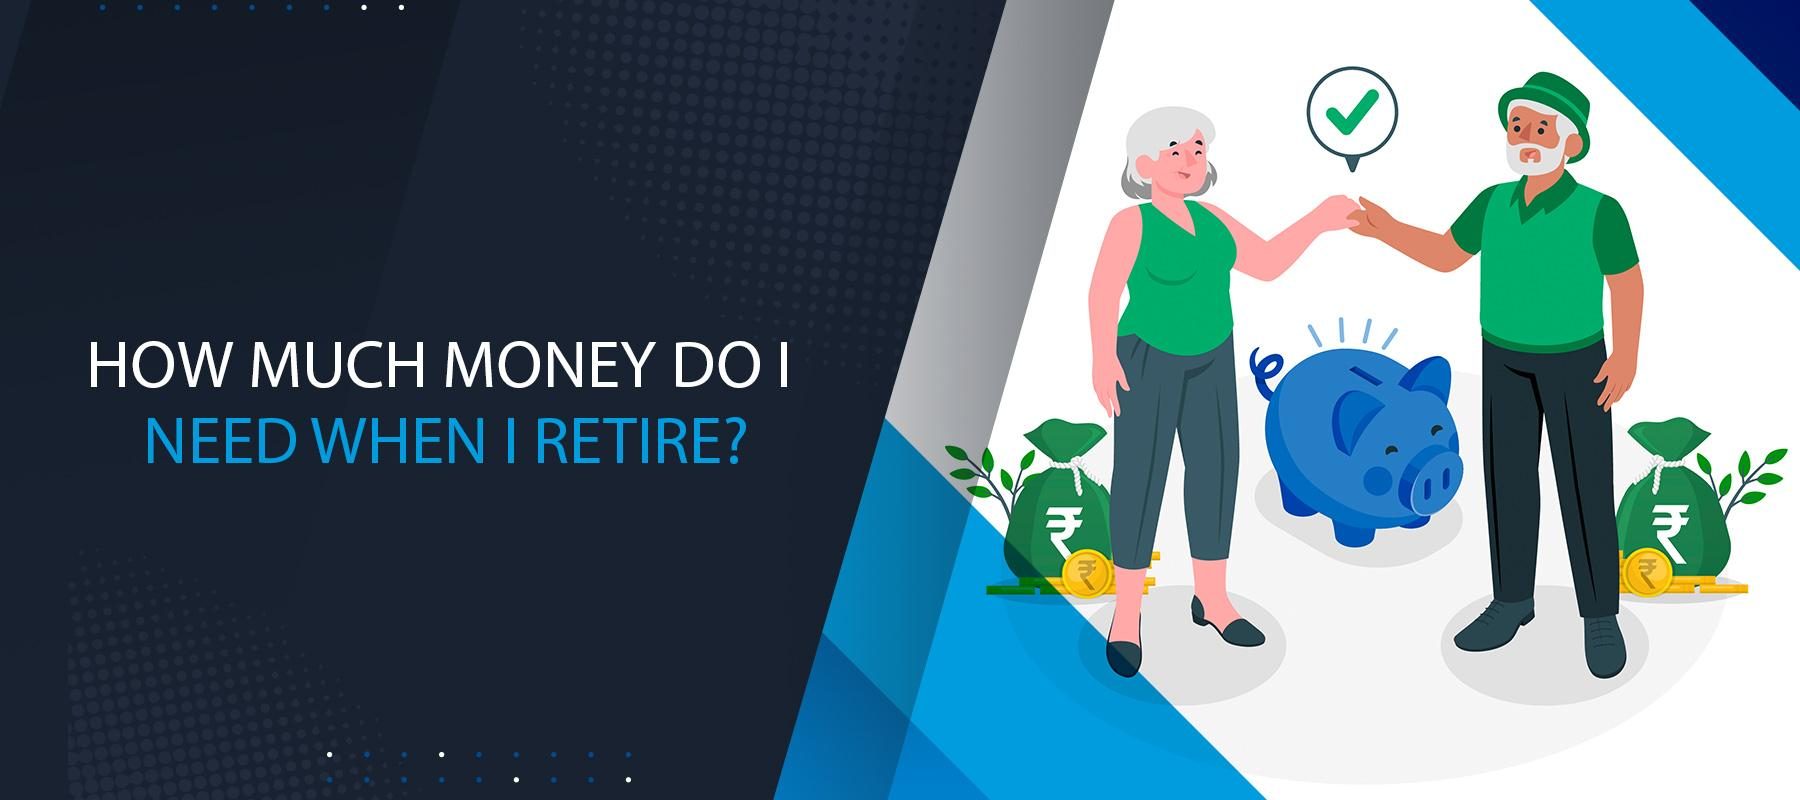 How Much Money Do I Need When I Retire